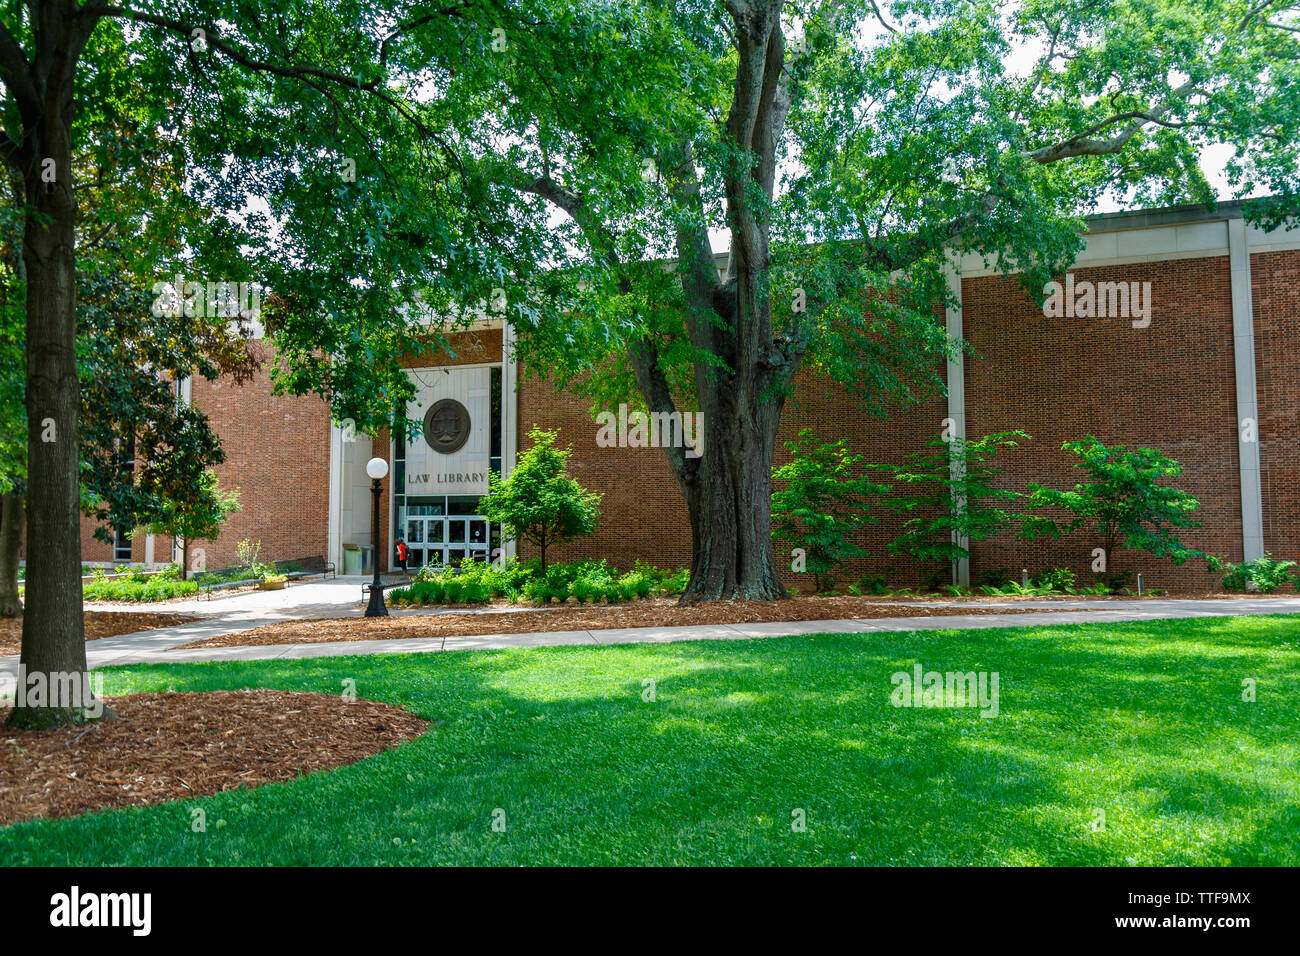 ATHENS, GA, USA - May 3: Alexander Campbell King Law Library on May 3, 2019 at the University of Georgia, North Campus in Athens, Georgia. Stock Photo